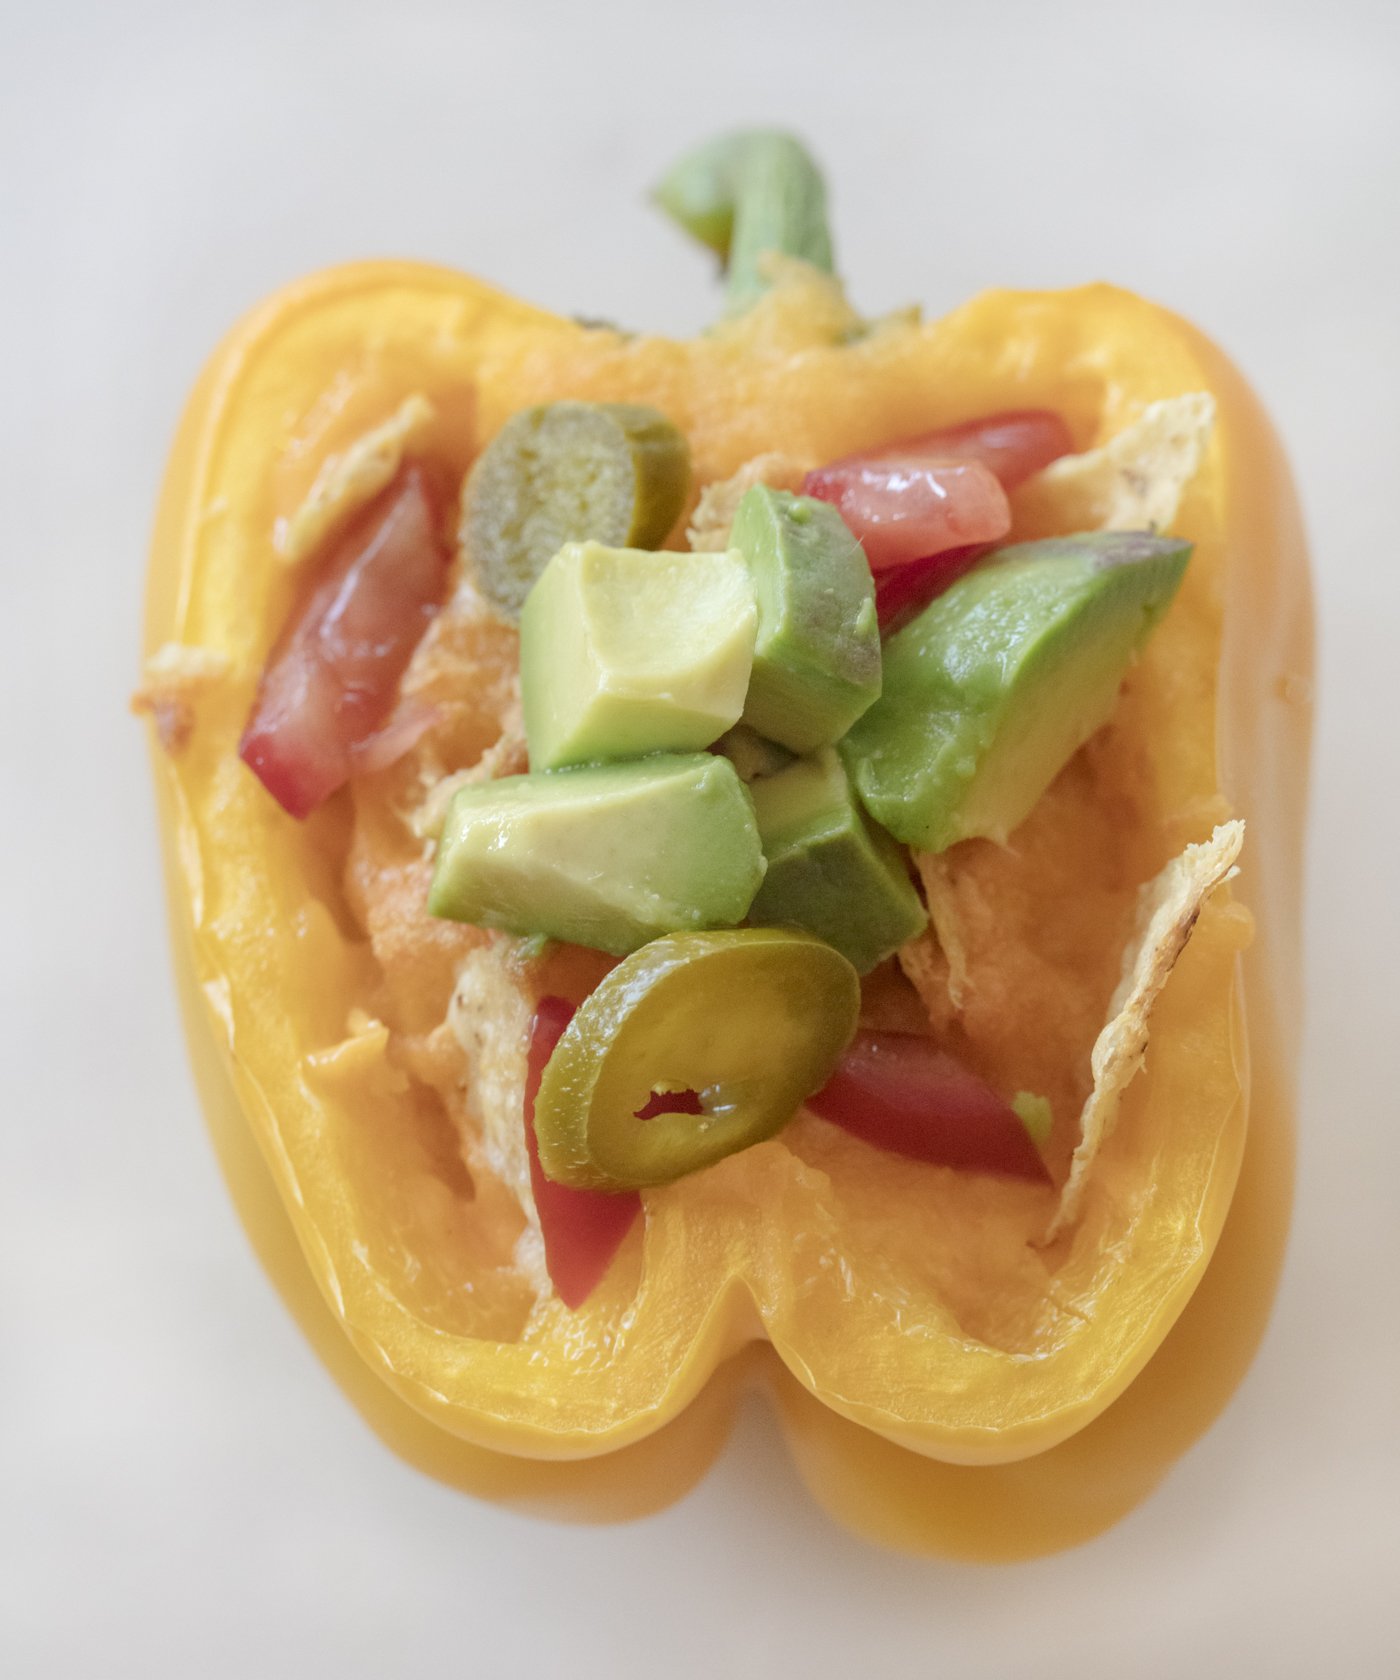 yellow bell pepper stuffed with nacho cheese, avocado jalapeños and tortilla chips